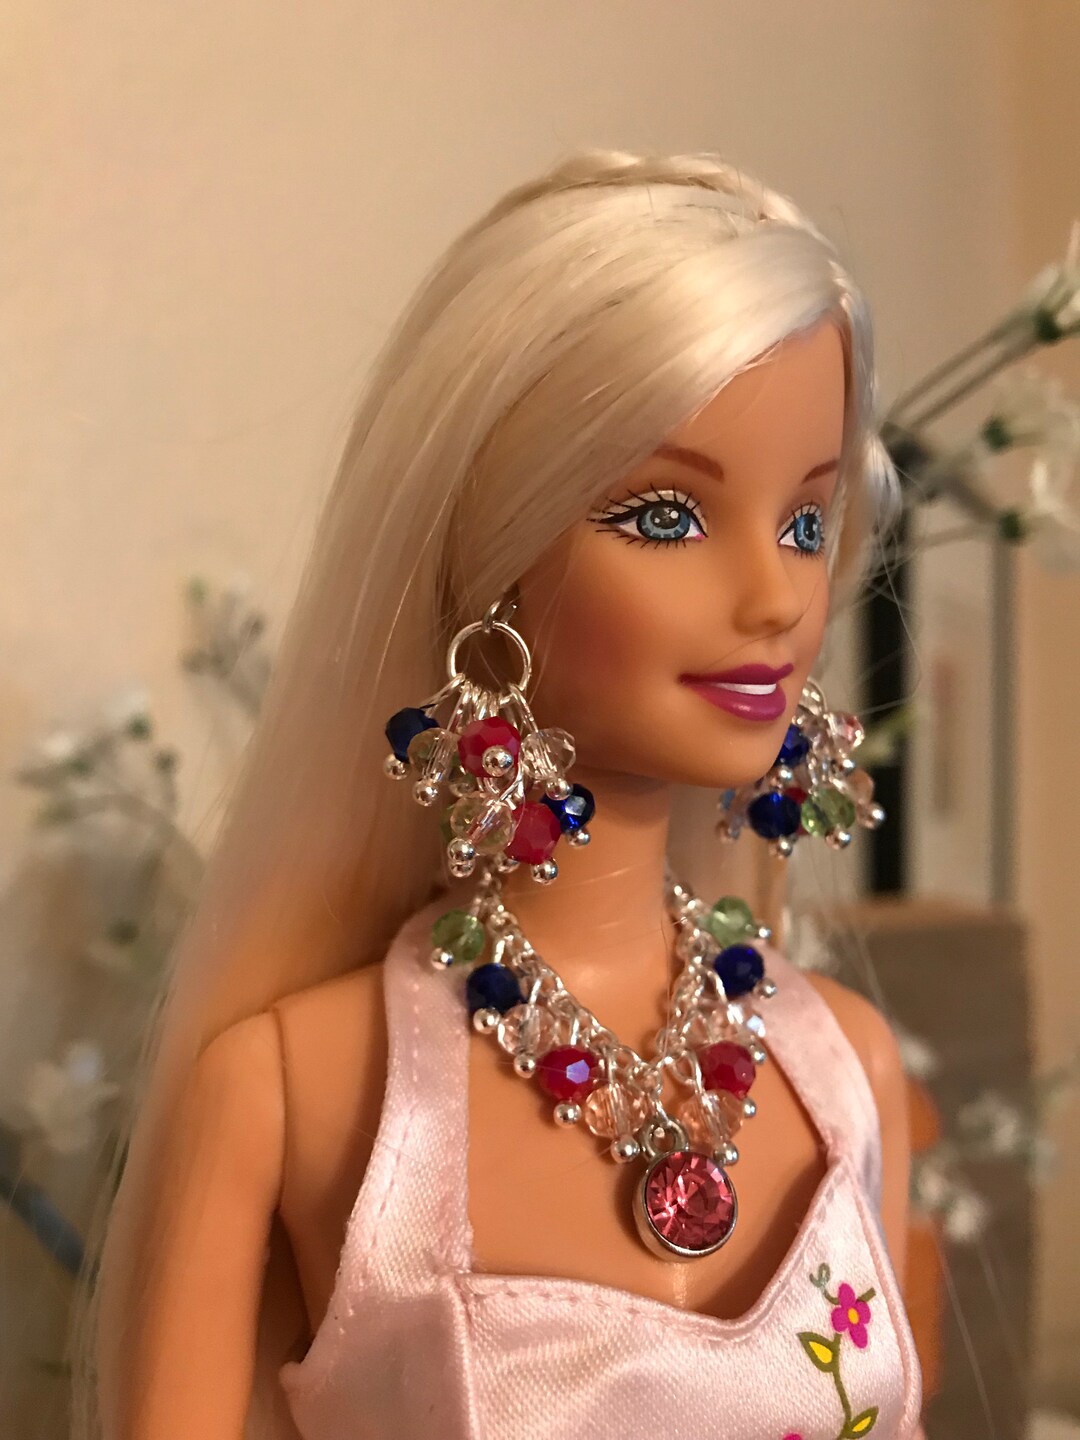 Handmade Jewelry for Barbie - Yellow and Silver Beads Heart Necklace and  Earring